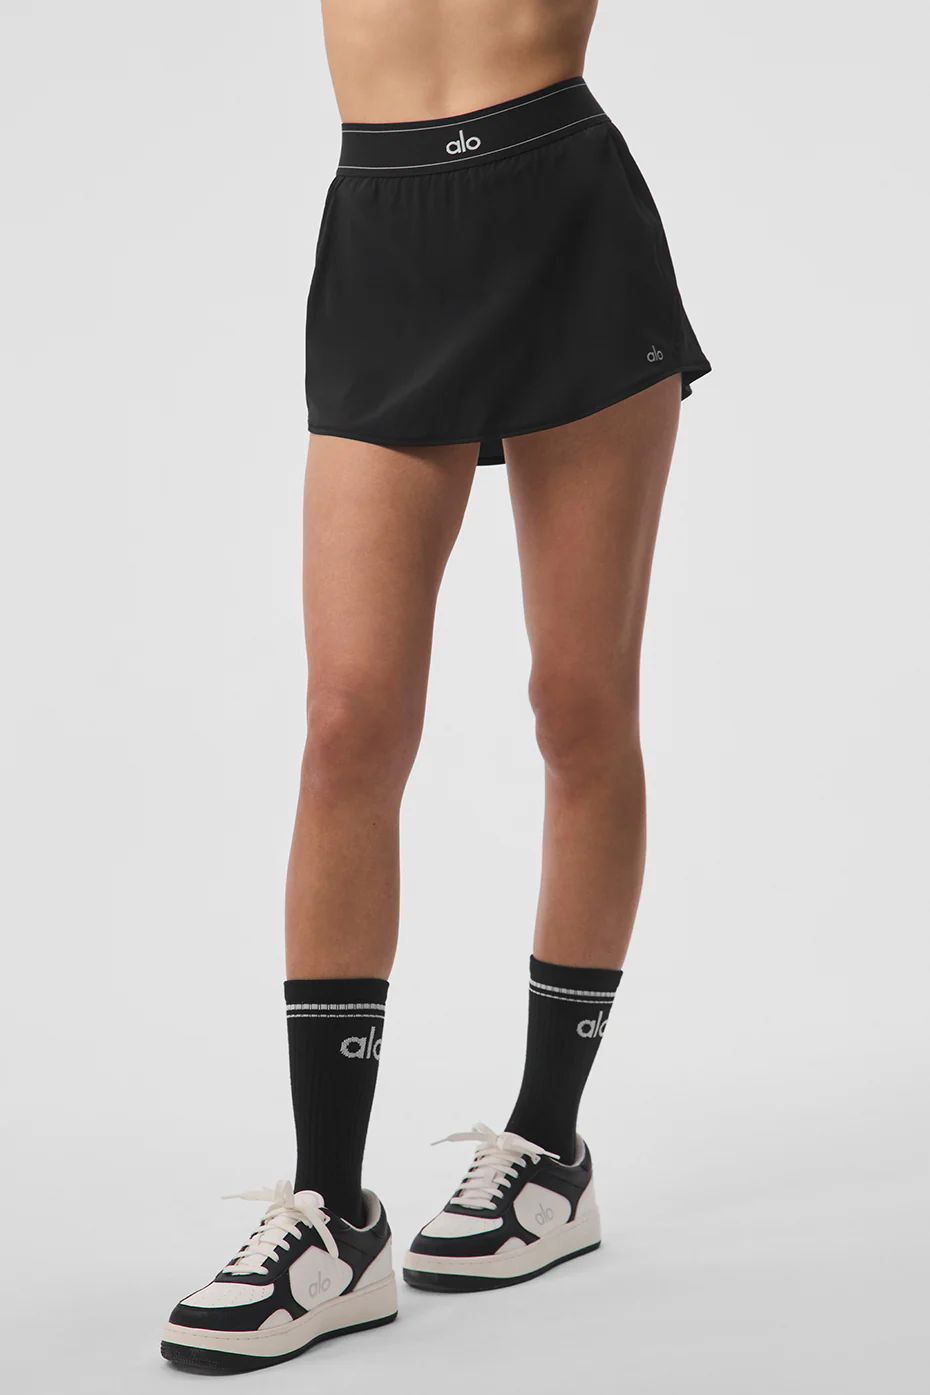 Match Point Tennis Skirt in Black, Size: Large | Alo YogaÂ® | Alo Yoga